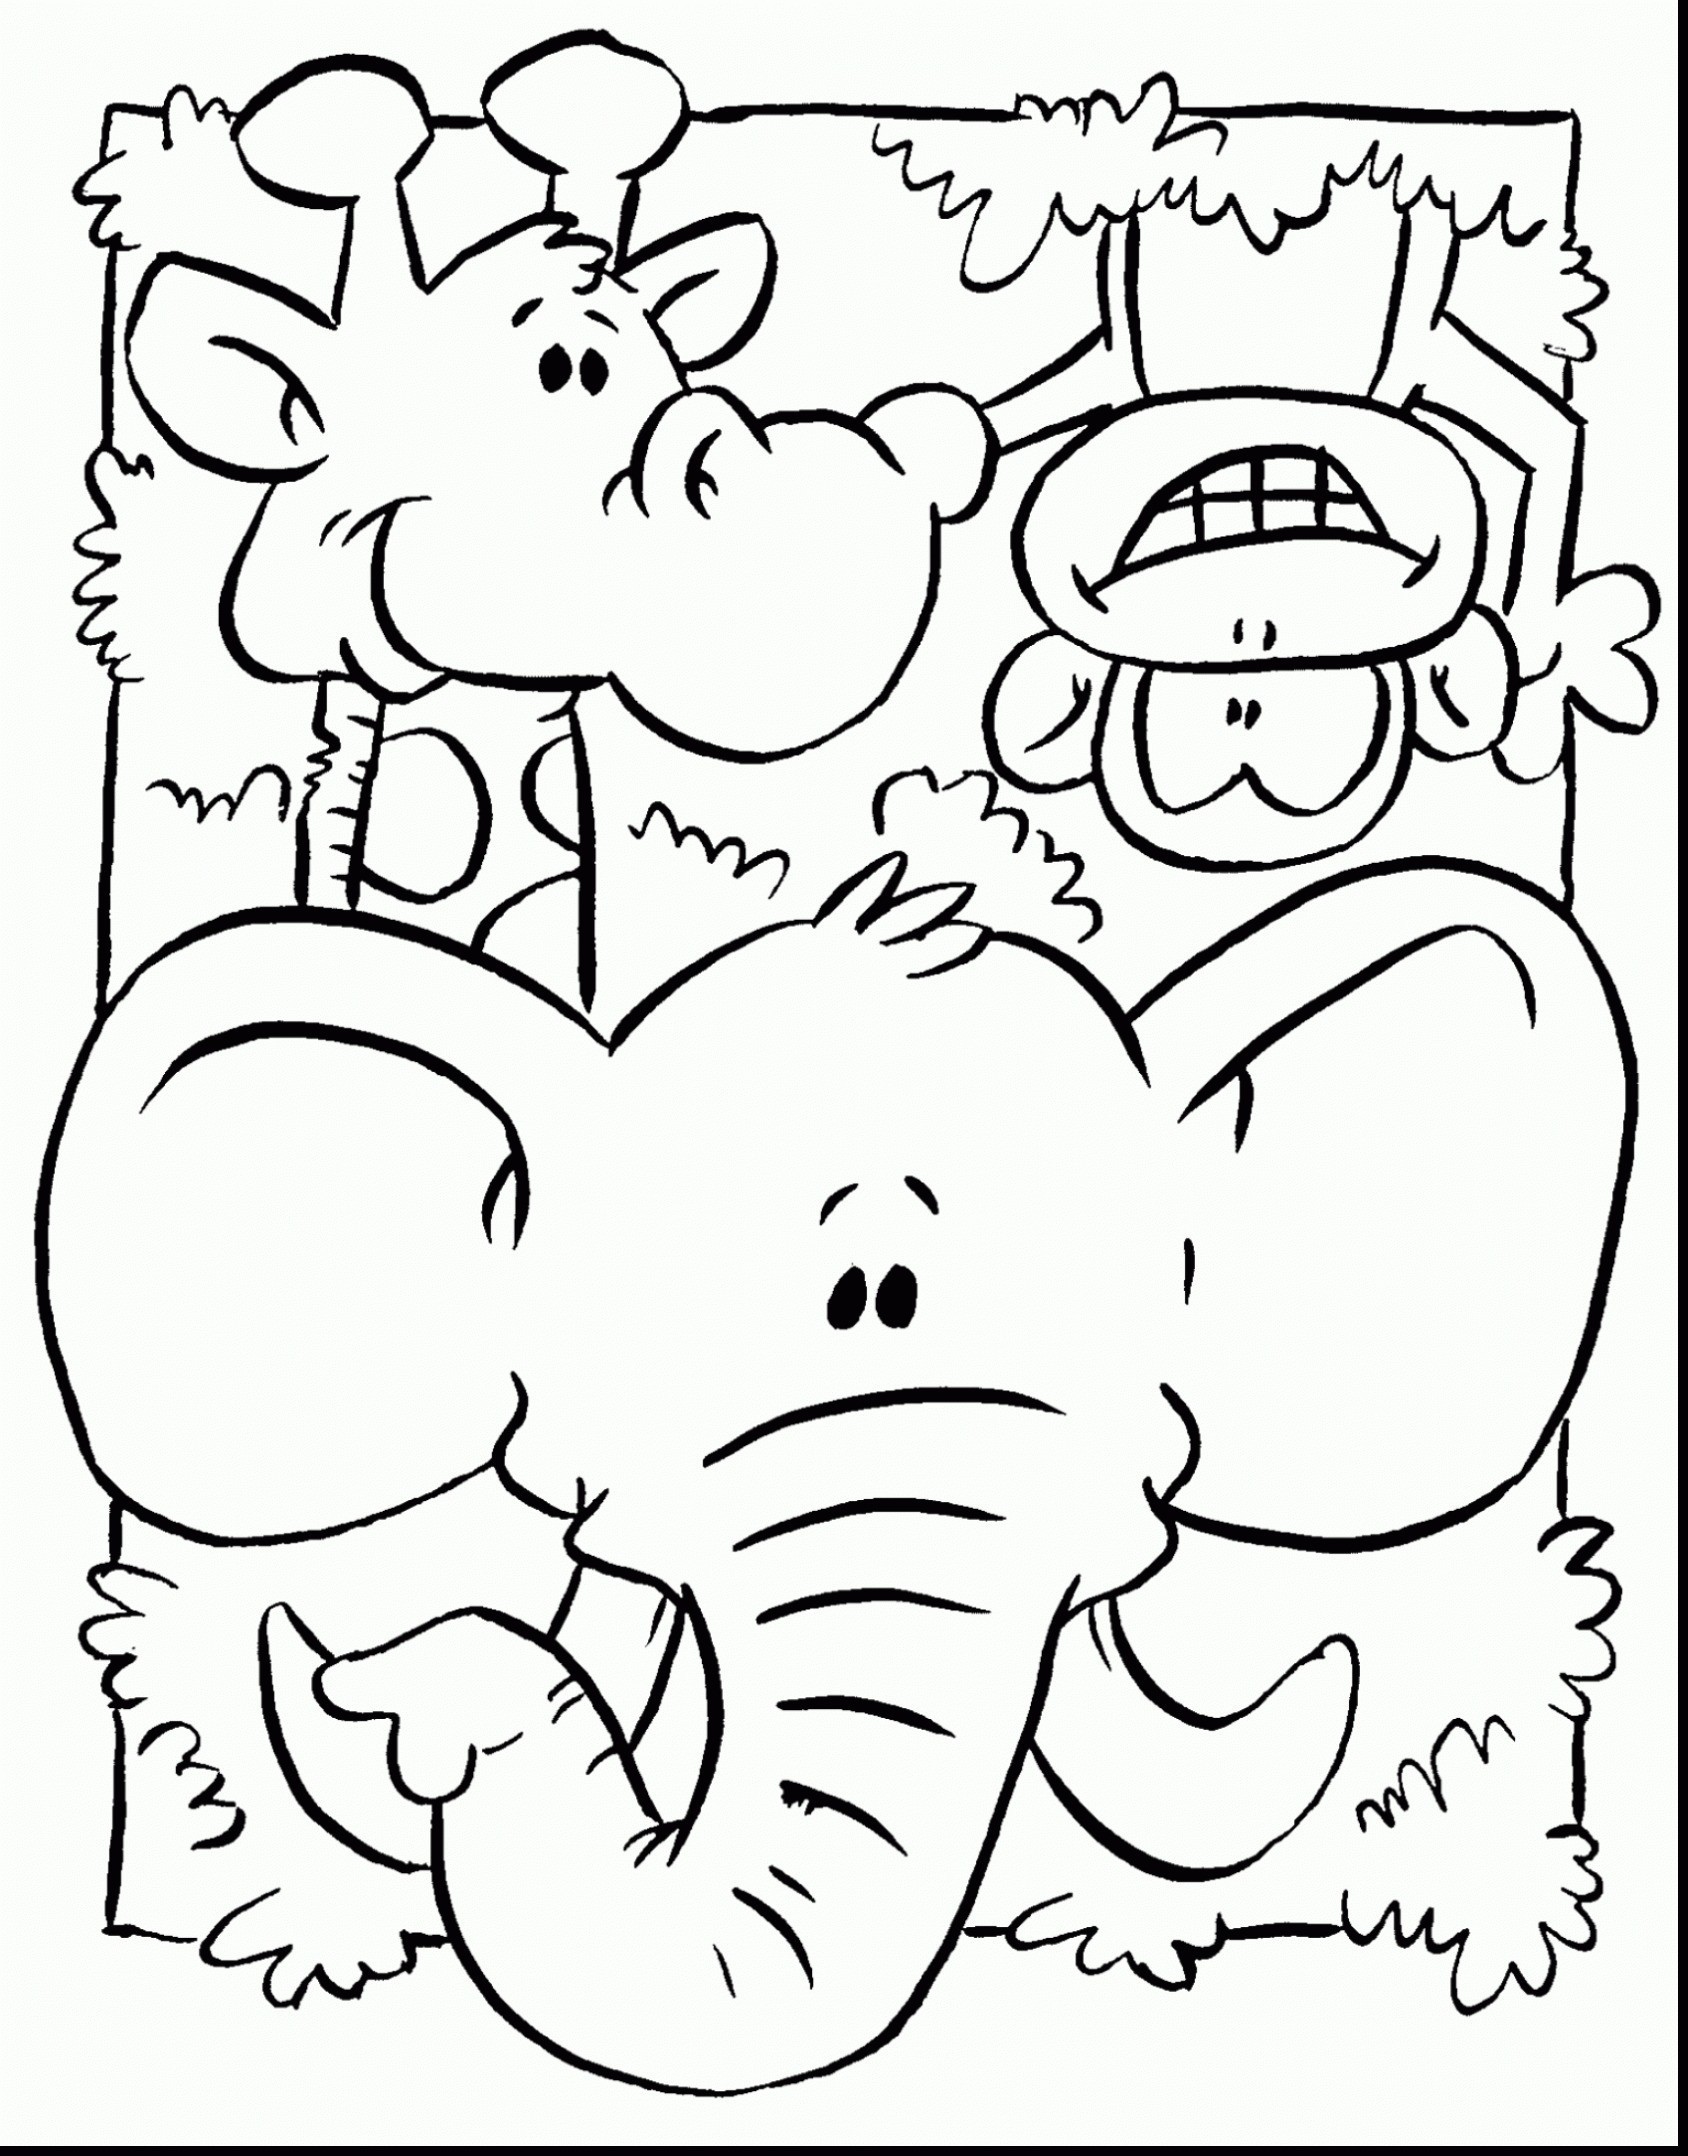 Zoo Animal Coloring Pages - BubaKids.com